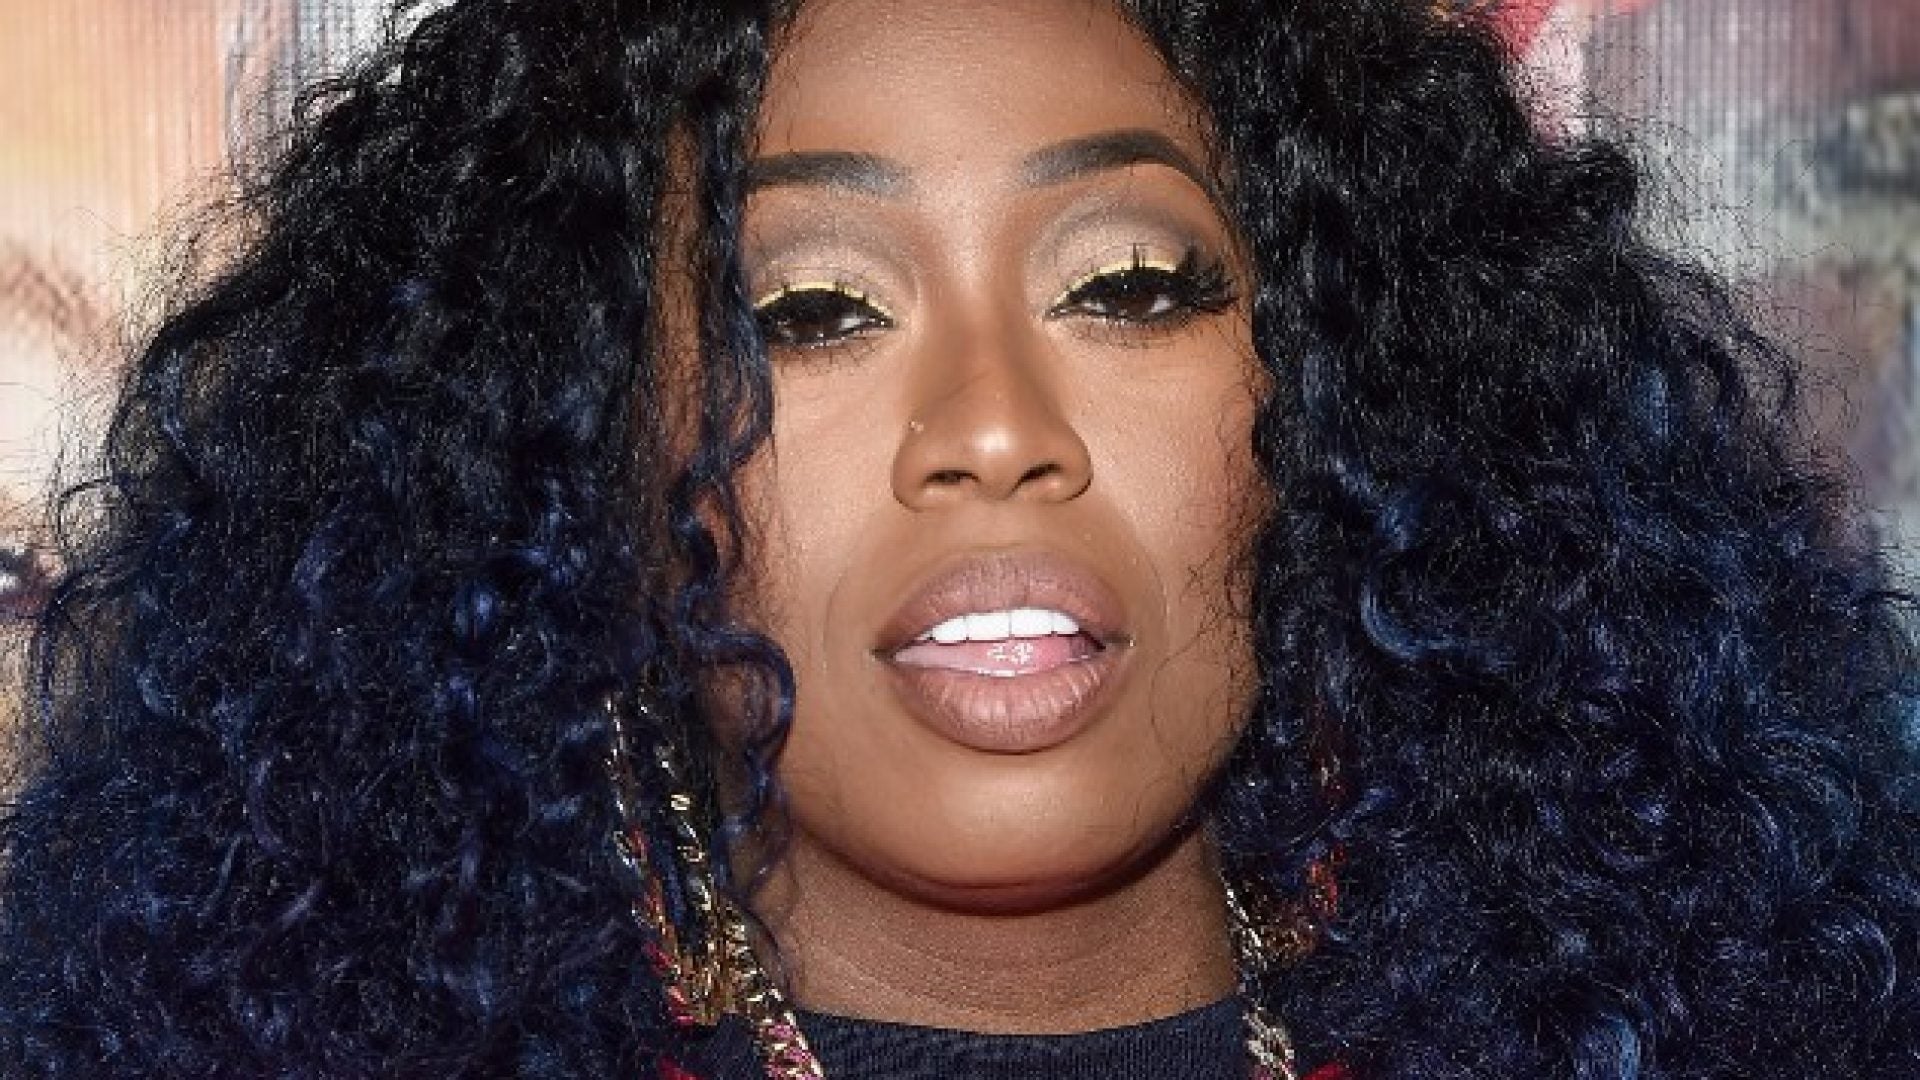 Missy Posts Stunning Photo With Touching Message About Embracing Individuality